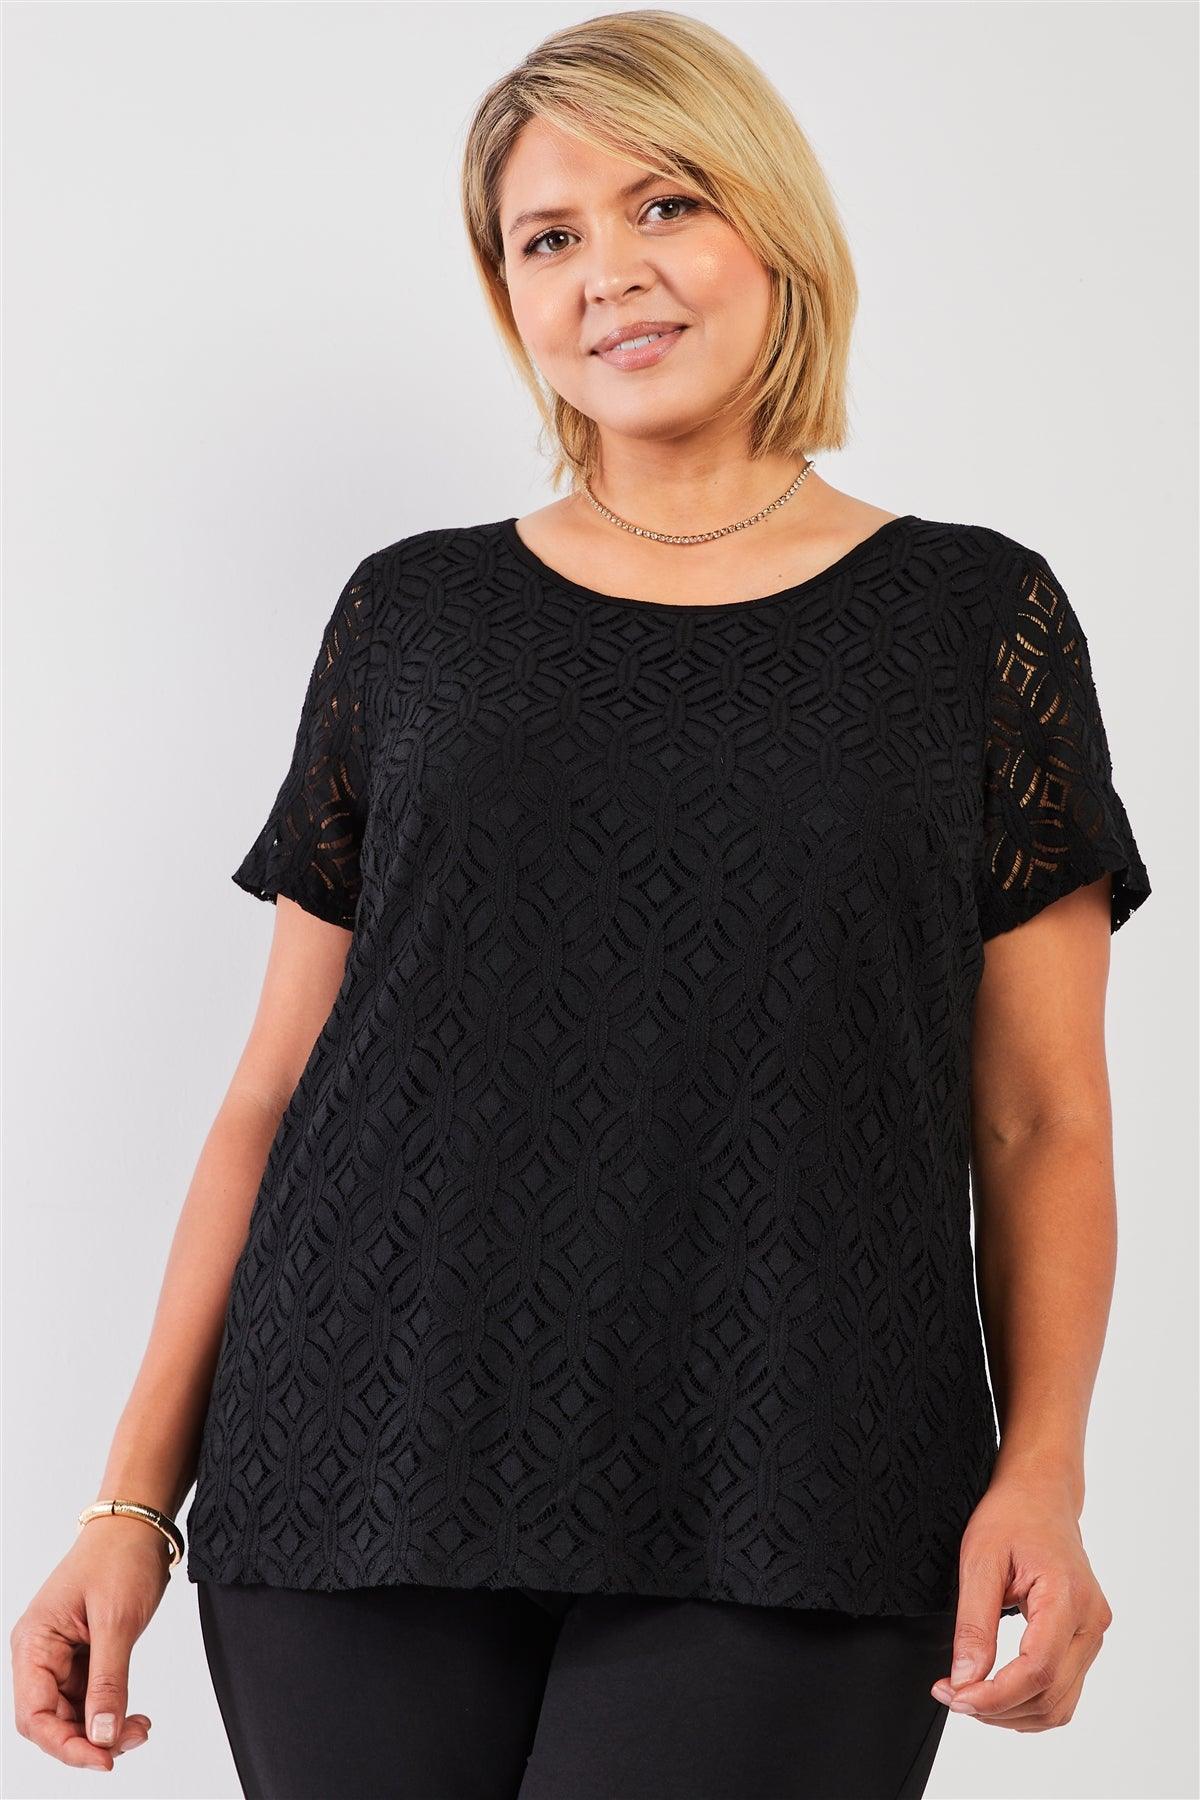 Junior Plus Black Round Neck Short Sleeve Lace Embroidery Top /1-2-1